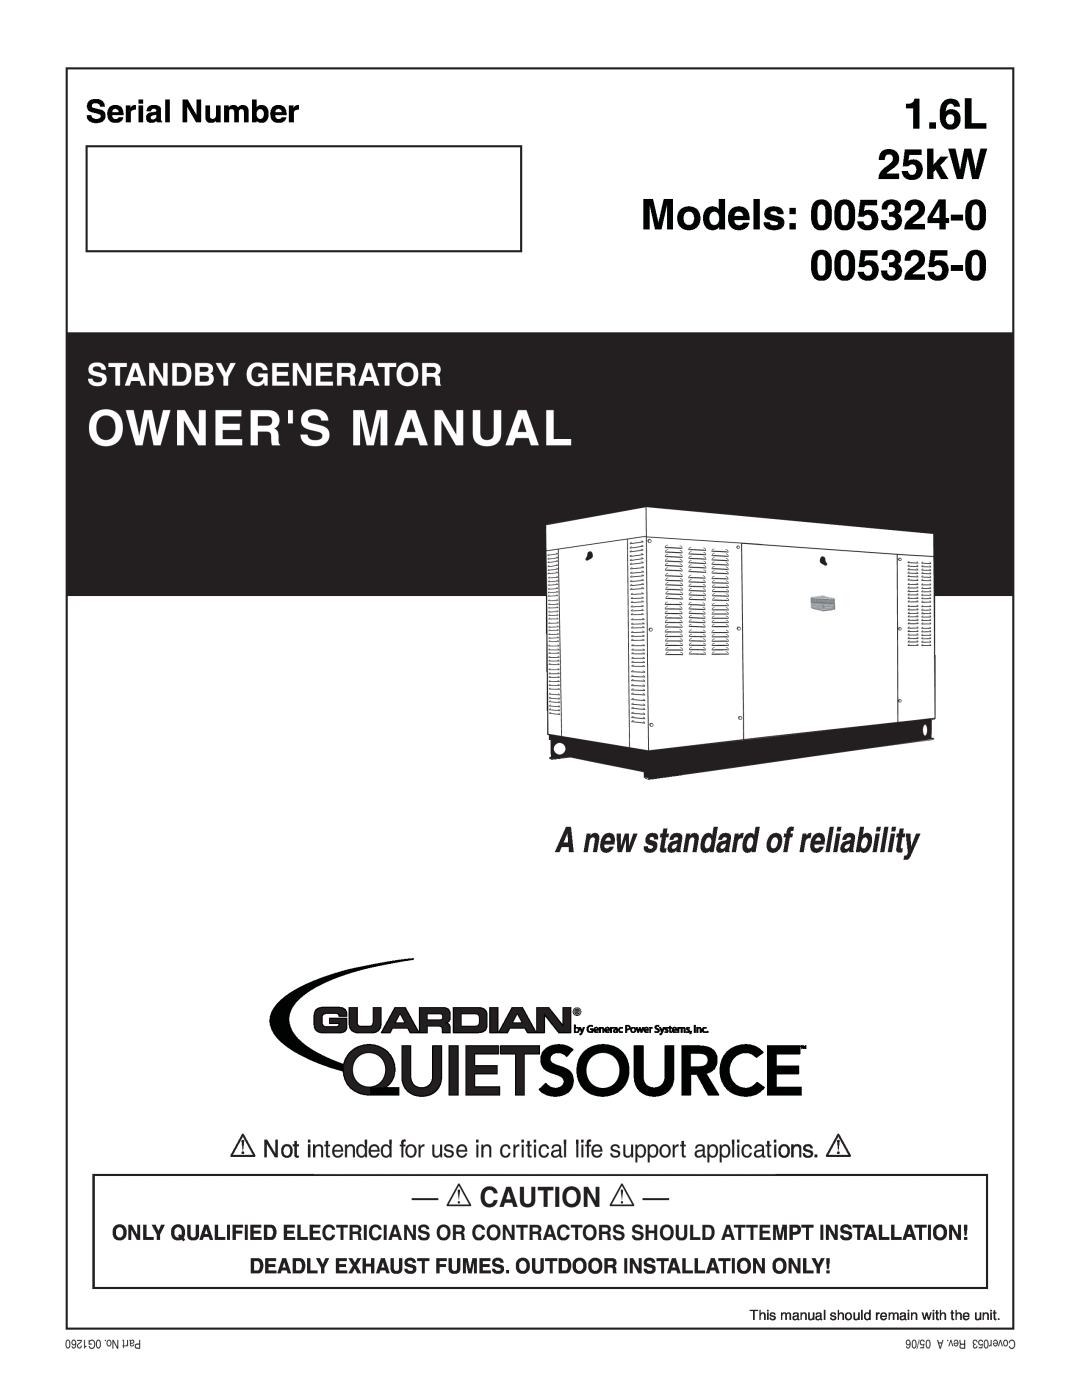 Generac Power Systems 005325-0, 005324-0 owner manual Deadly Exhaust Fumes. Outdoor Installation Only, 1.6L 25kW Models 